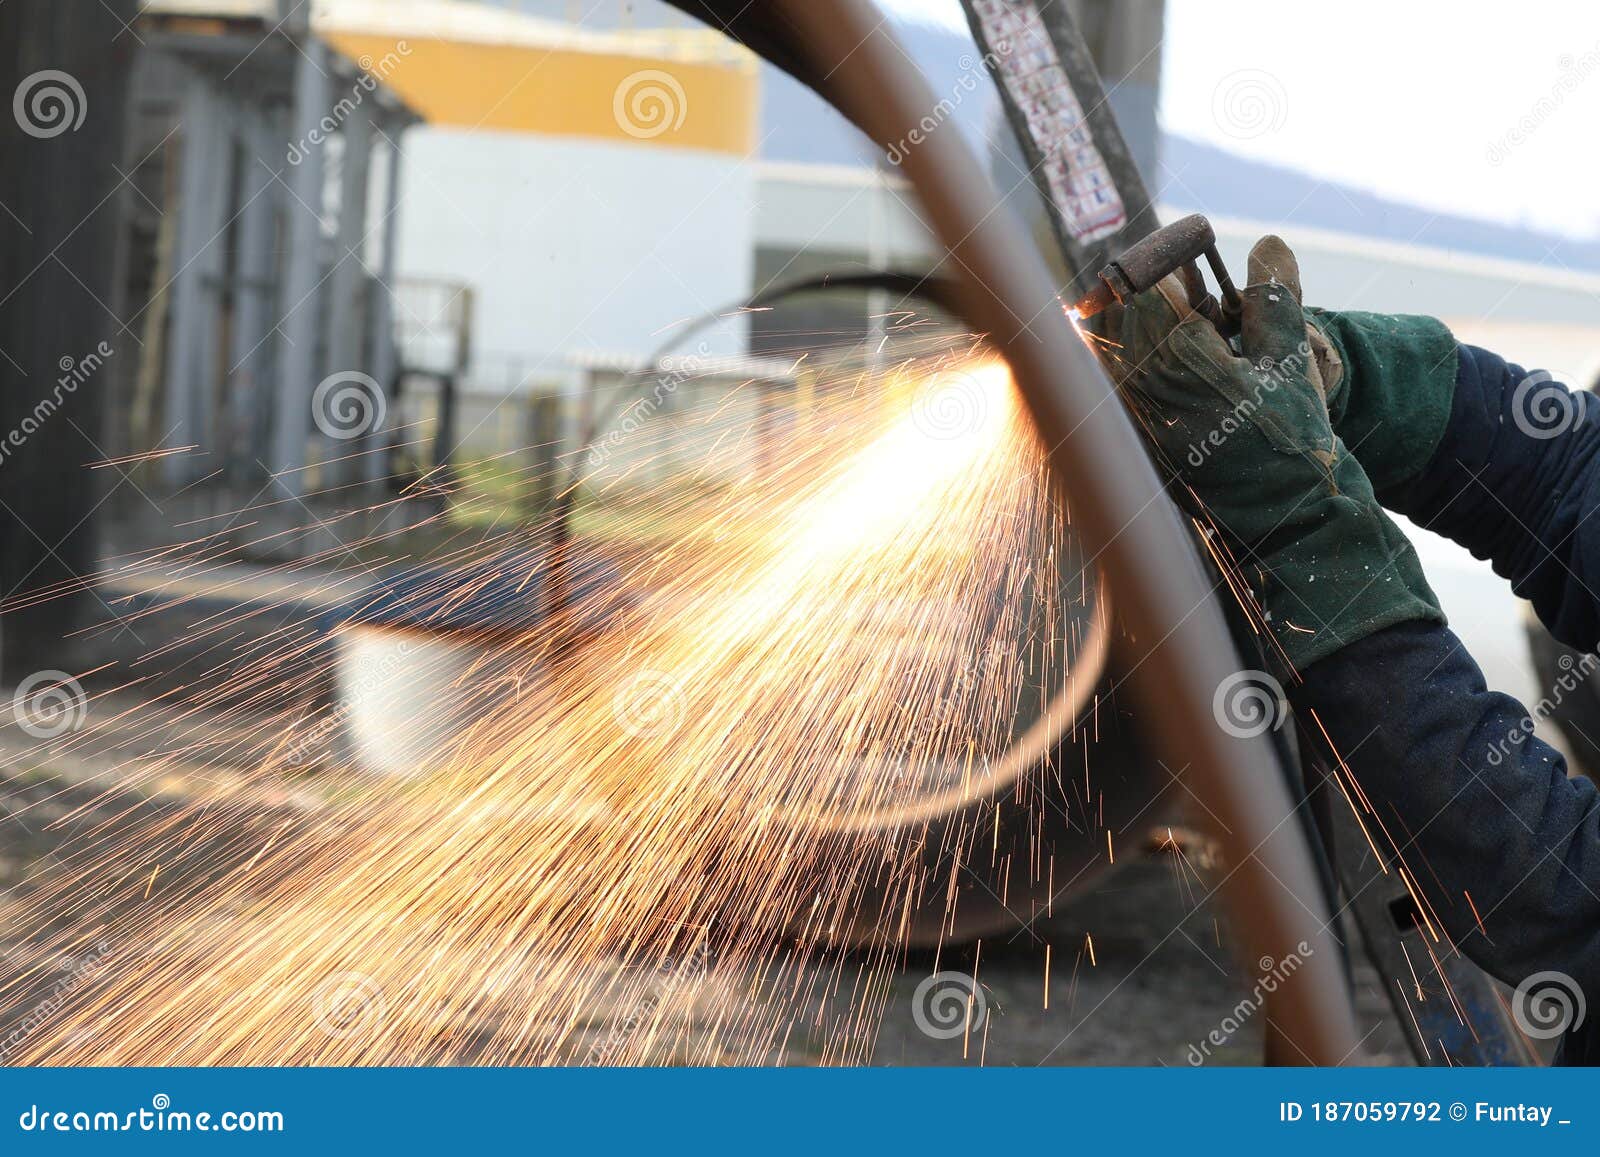 Oxy Fuel Welding And Cutting Process Oxy Fuel Welding Oxyacetylene Oxy Or Gas Welding In The U S Stock Photo Image Of Tool People 187059792